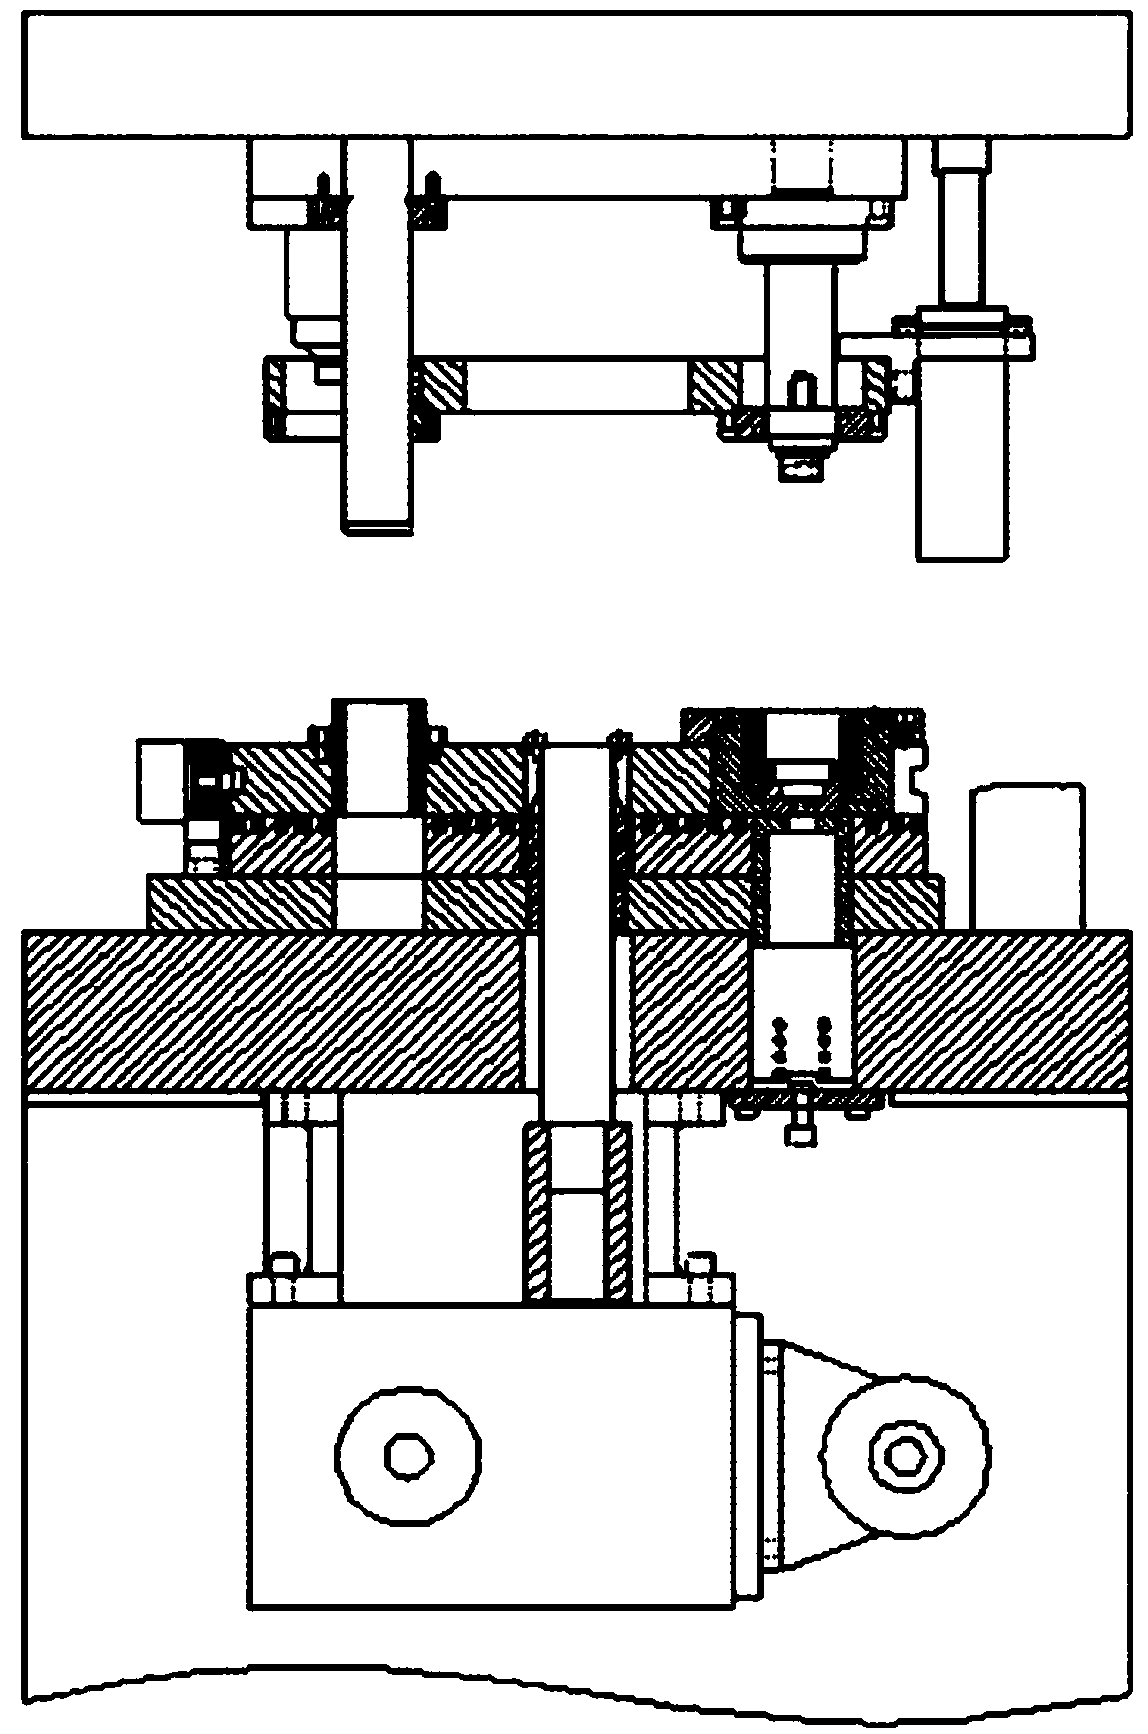 Molding machine based on module structure